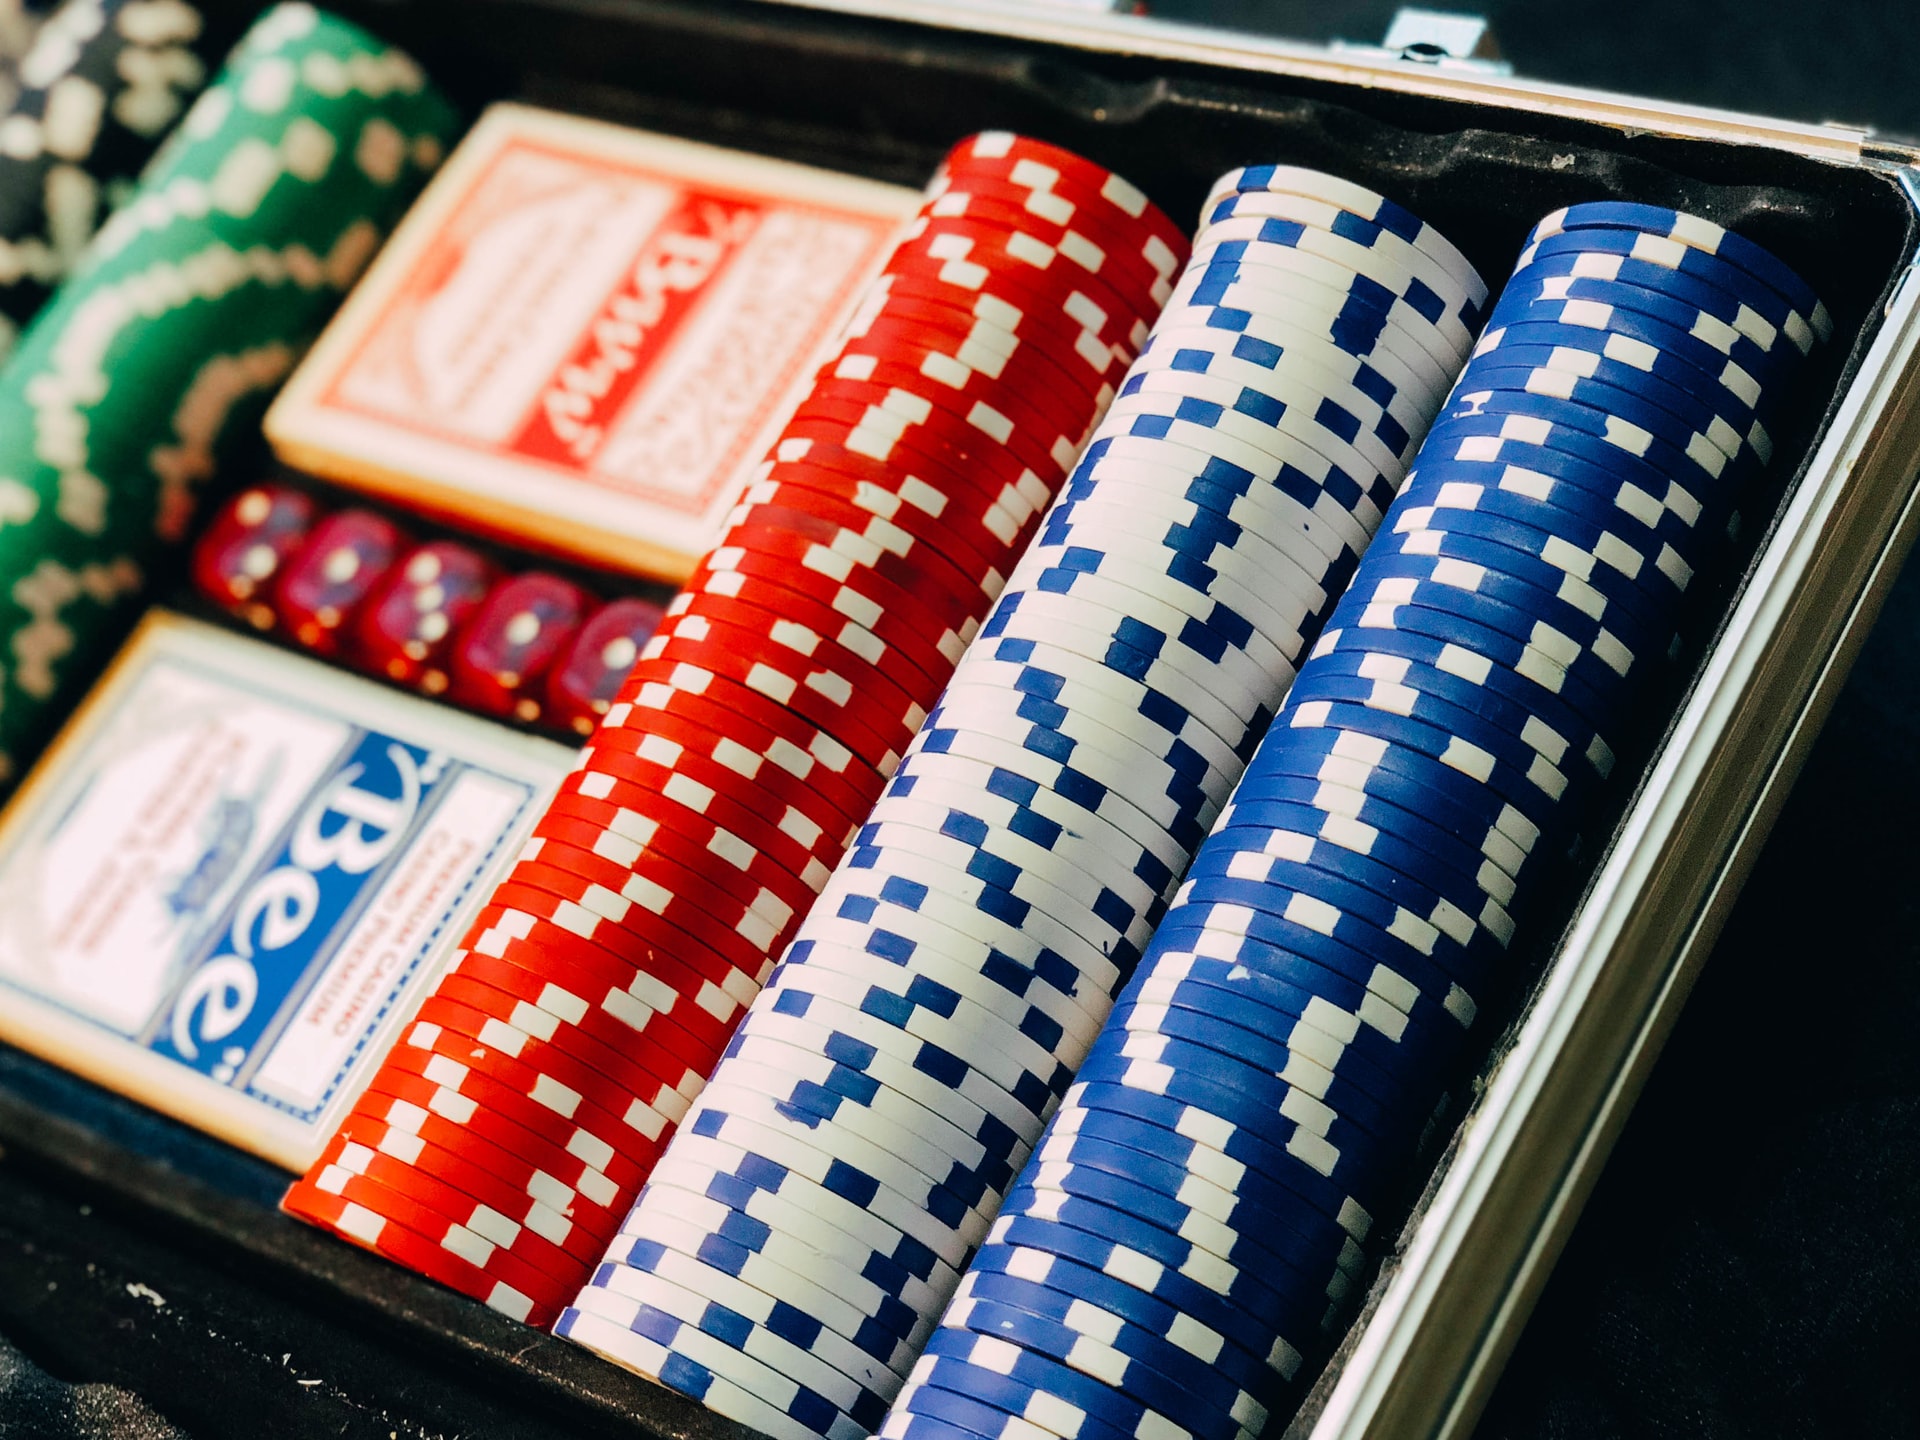 Dutch Tax Authority withdrew its appeal in PokerStars.eu tax case on Dutch players’ winnings